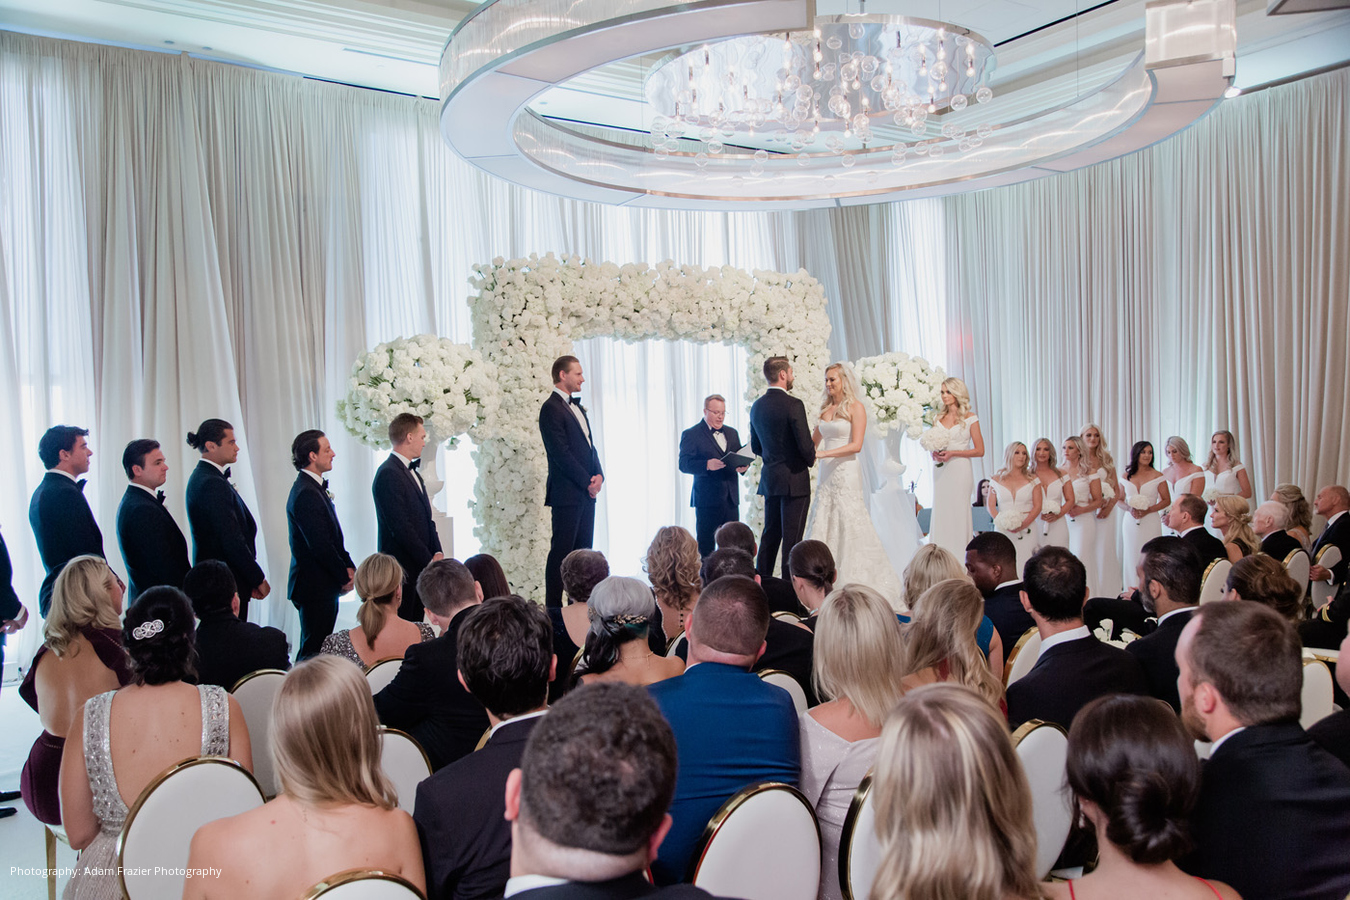 Adam Frazier Photography - Congratulations to Jackie and Kent where were  married this last Sat at the Waldorf Astoria!